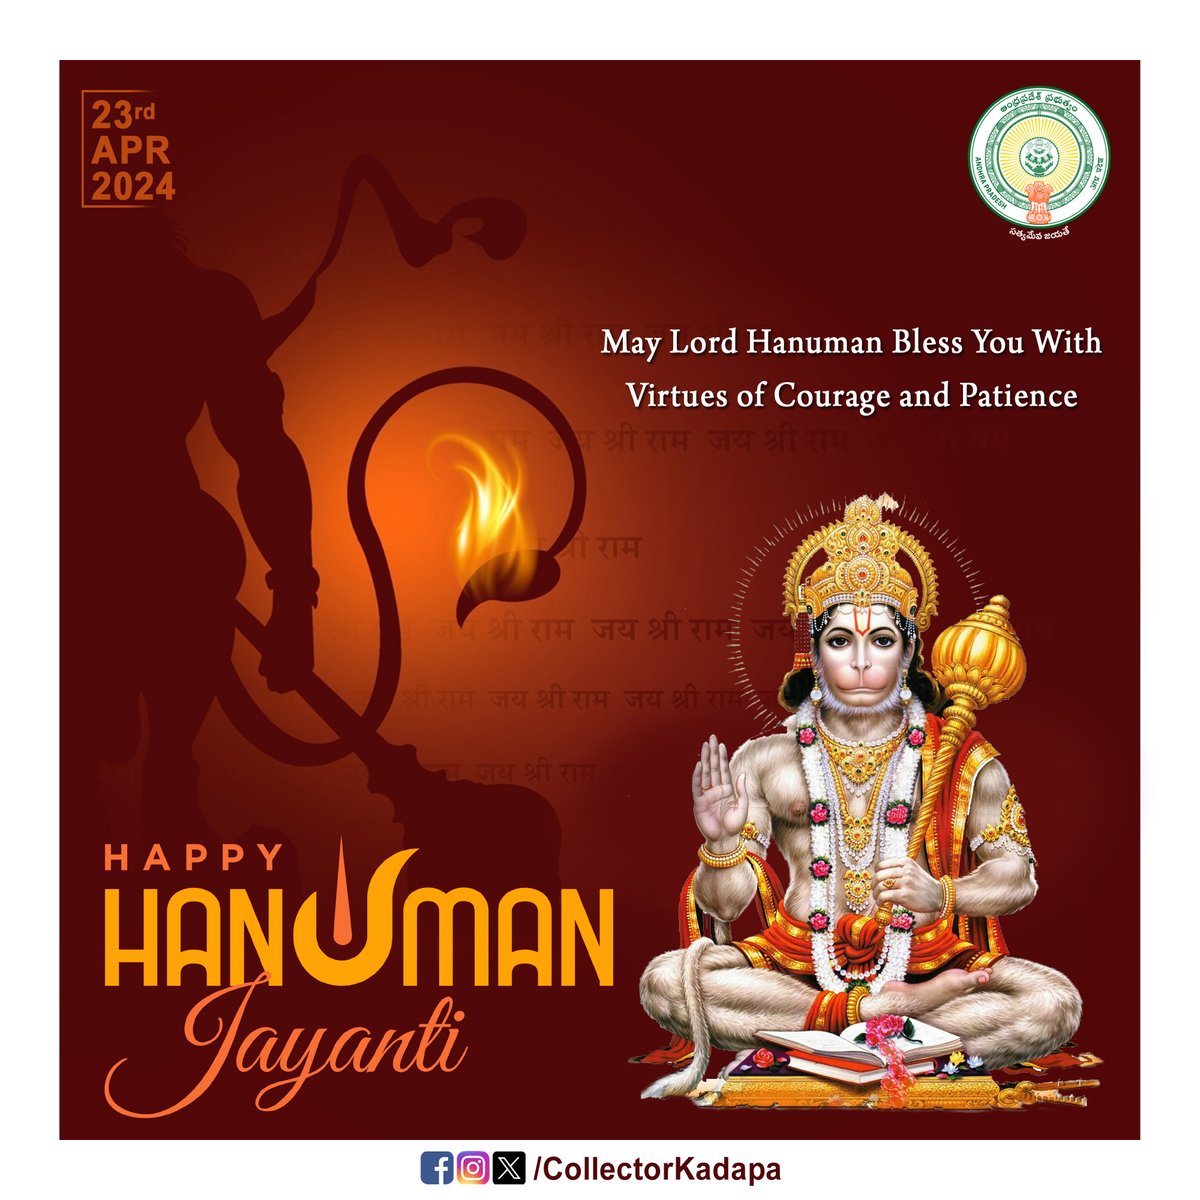 Happy Hanuman Jayanthi!

Embrace devotion, courage, and strength. May Lord Hanuman's blessings guide us through obstacles with grace.

Let righteousness and compassion fill our lives.

#HappyHanumanJayanti